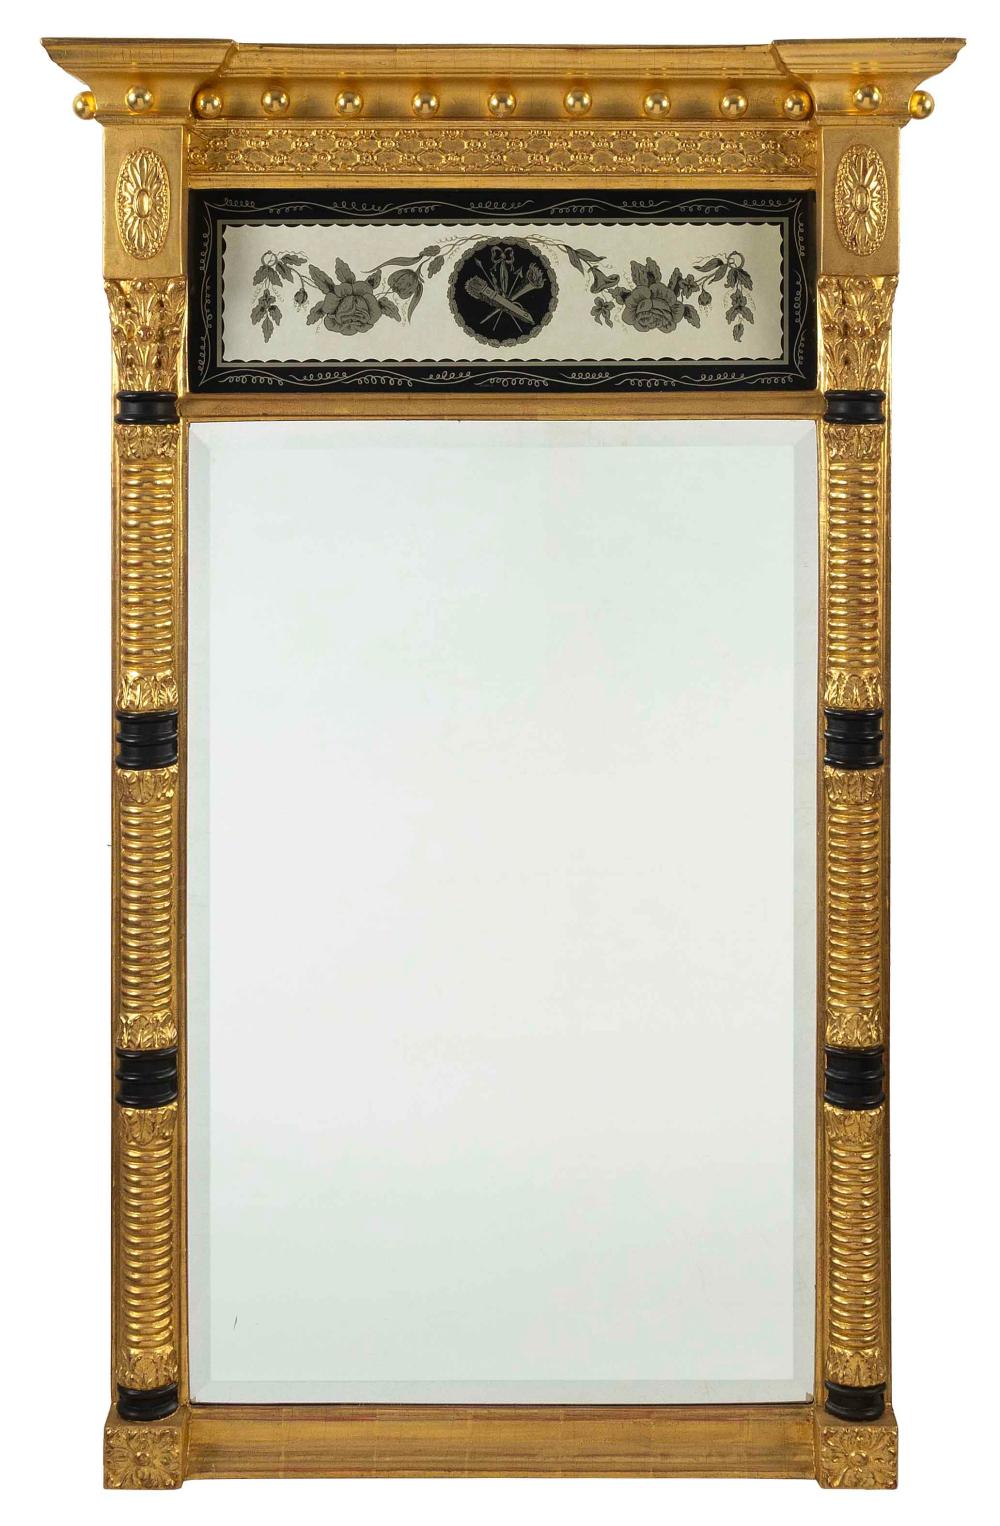 NEOCLASSICAL-STYLE EGLOMISE MIRROR